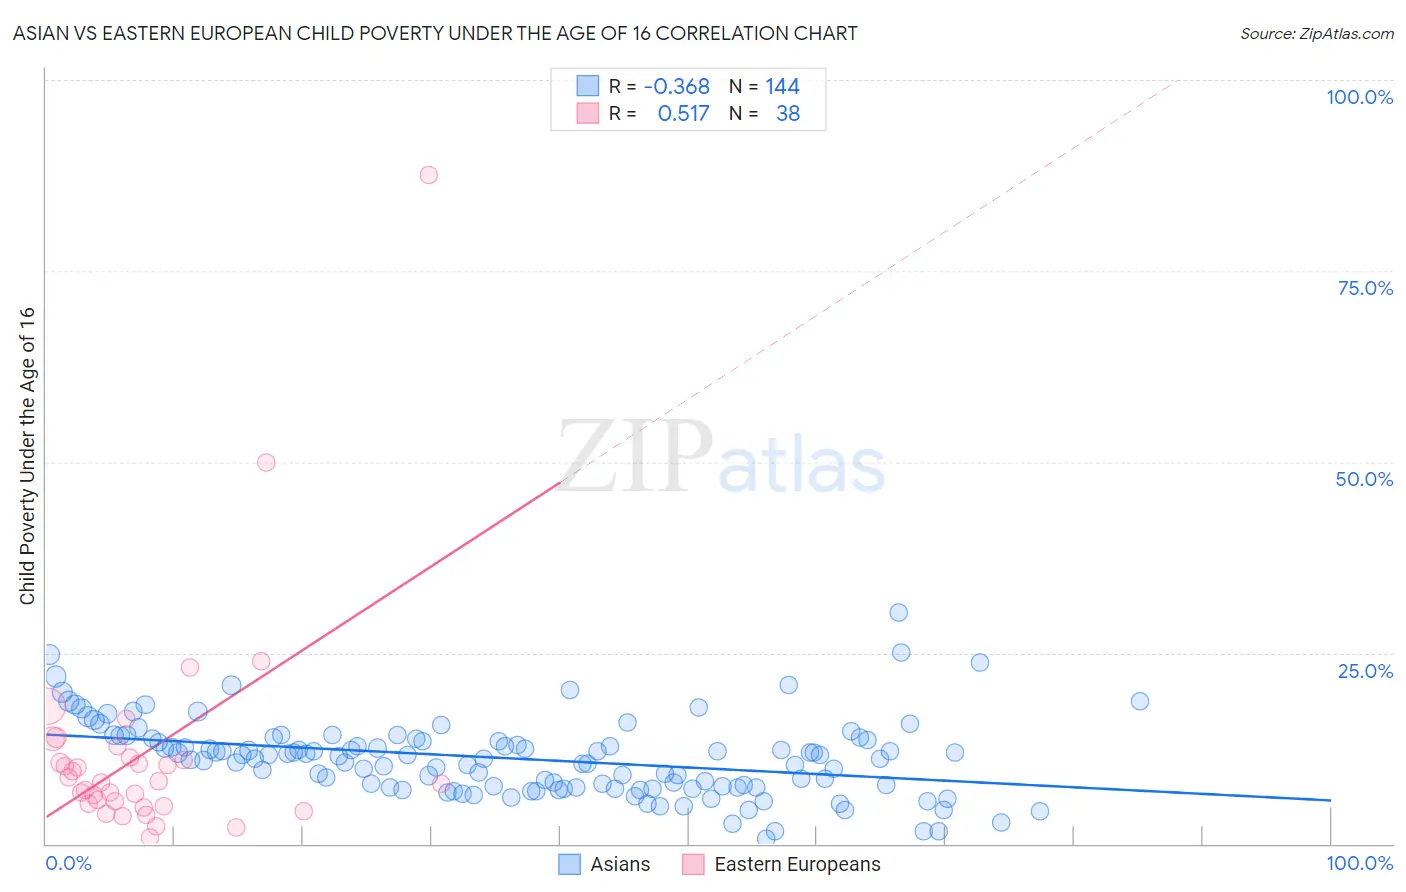 Asian vs Eastern European Child Poverty Under the Age of 16